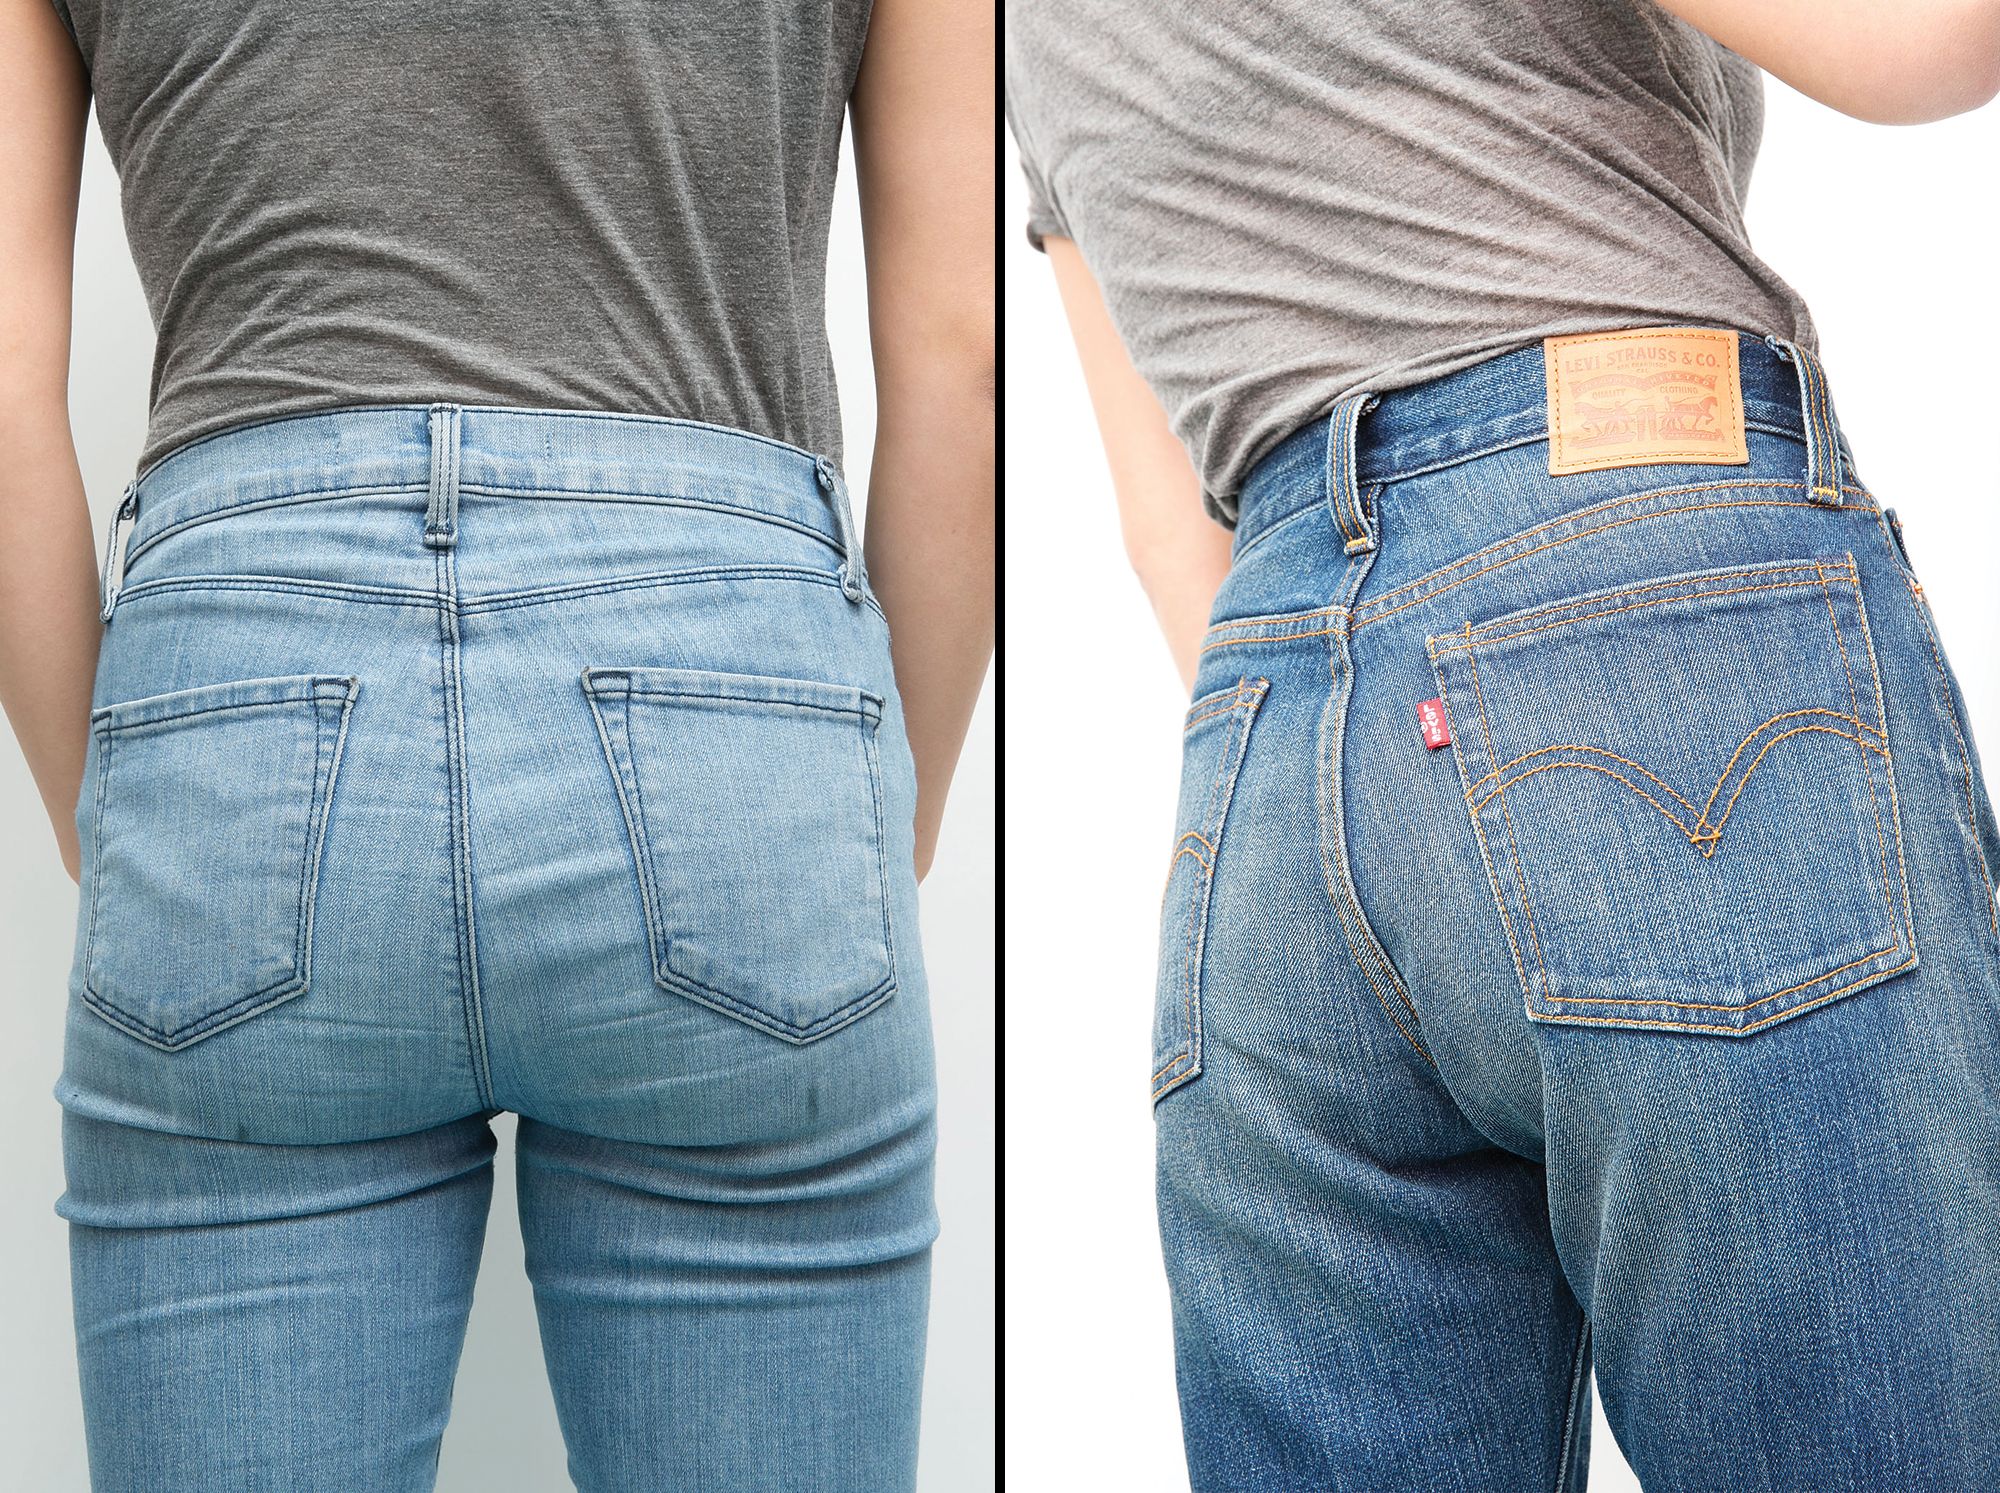 10 People Tried Wedgie Jeans and They Were Pretty Magical